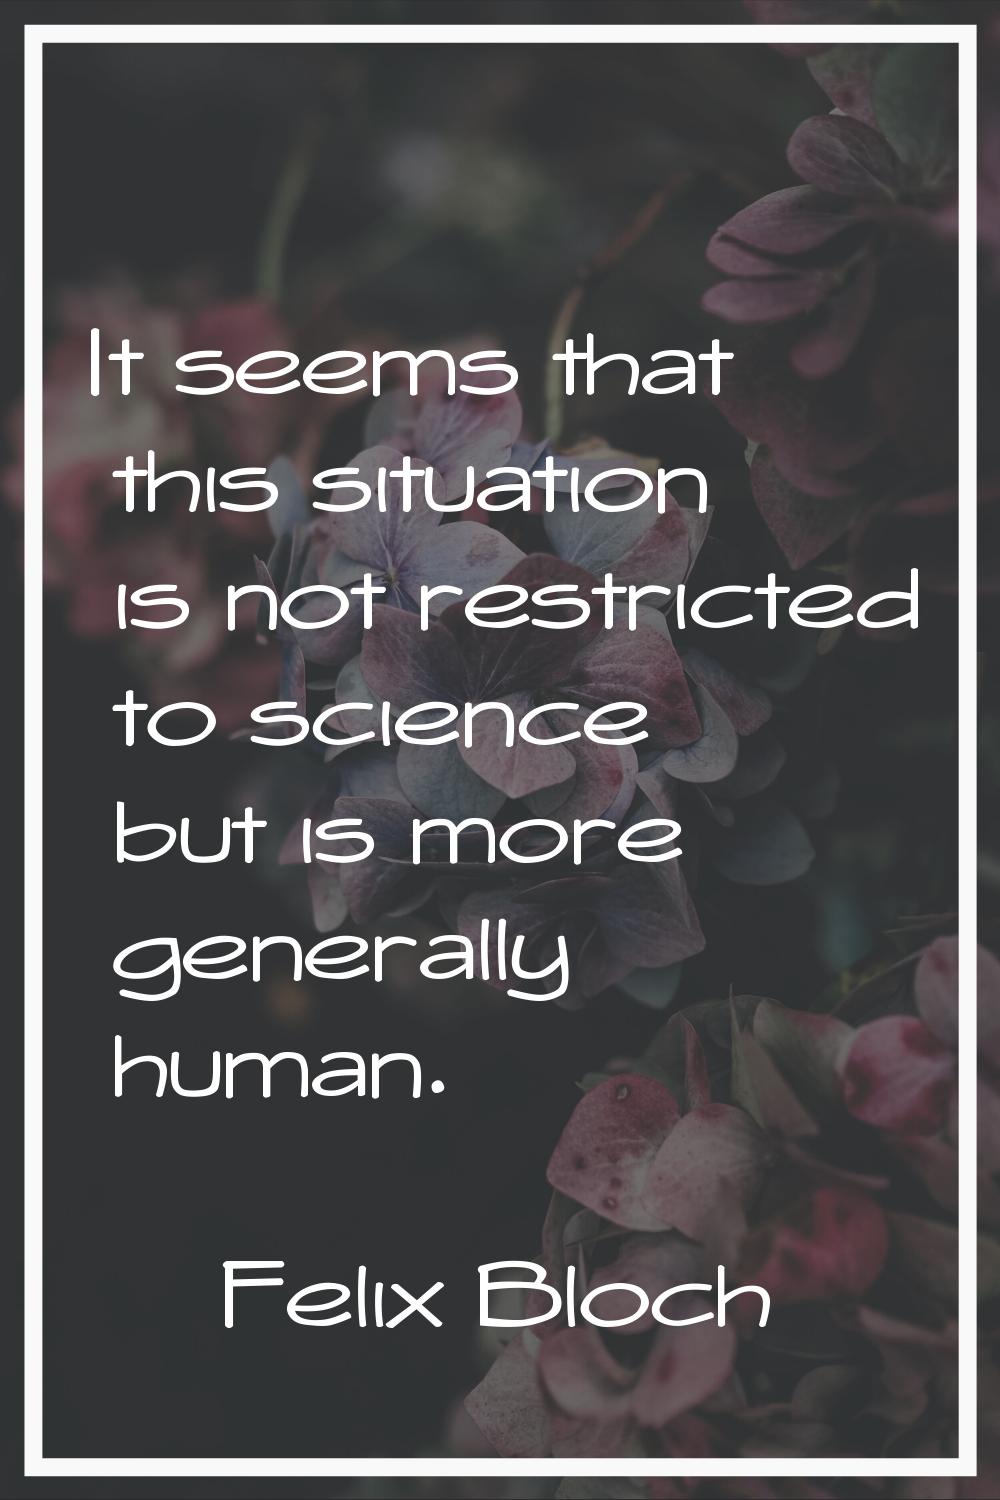 It seems that this situation is not restricted to science but is more generally human.